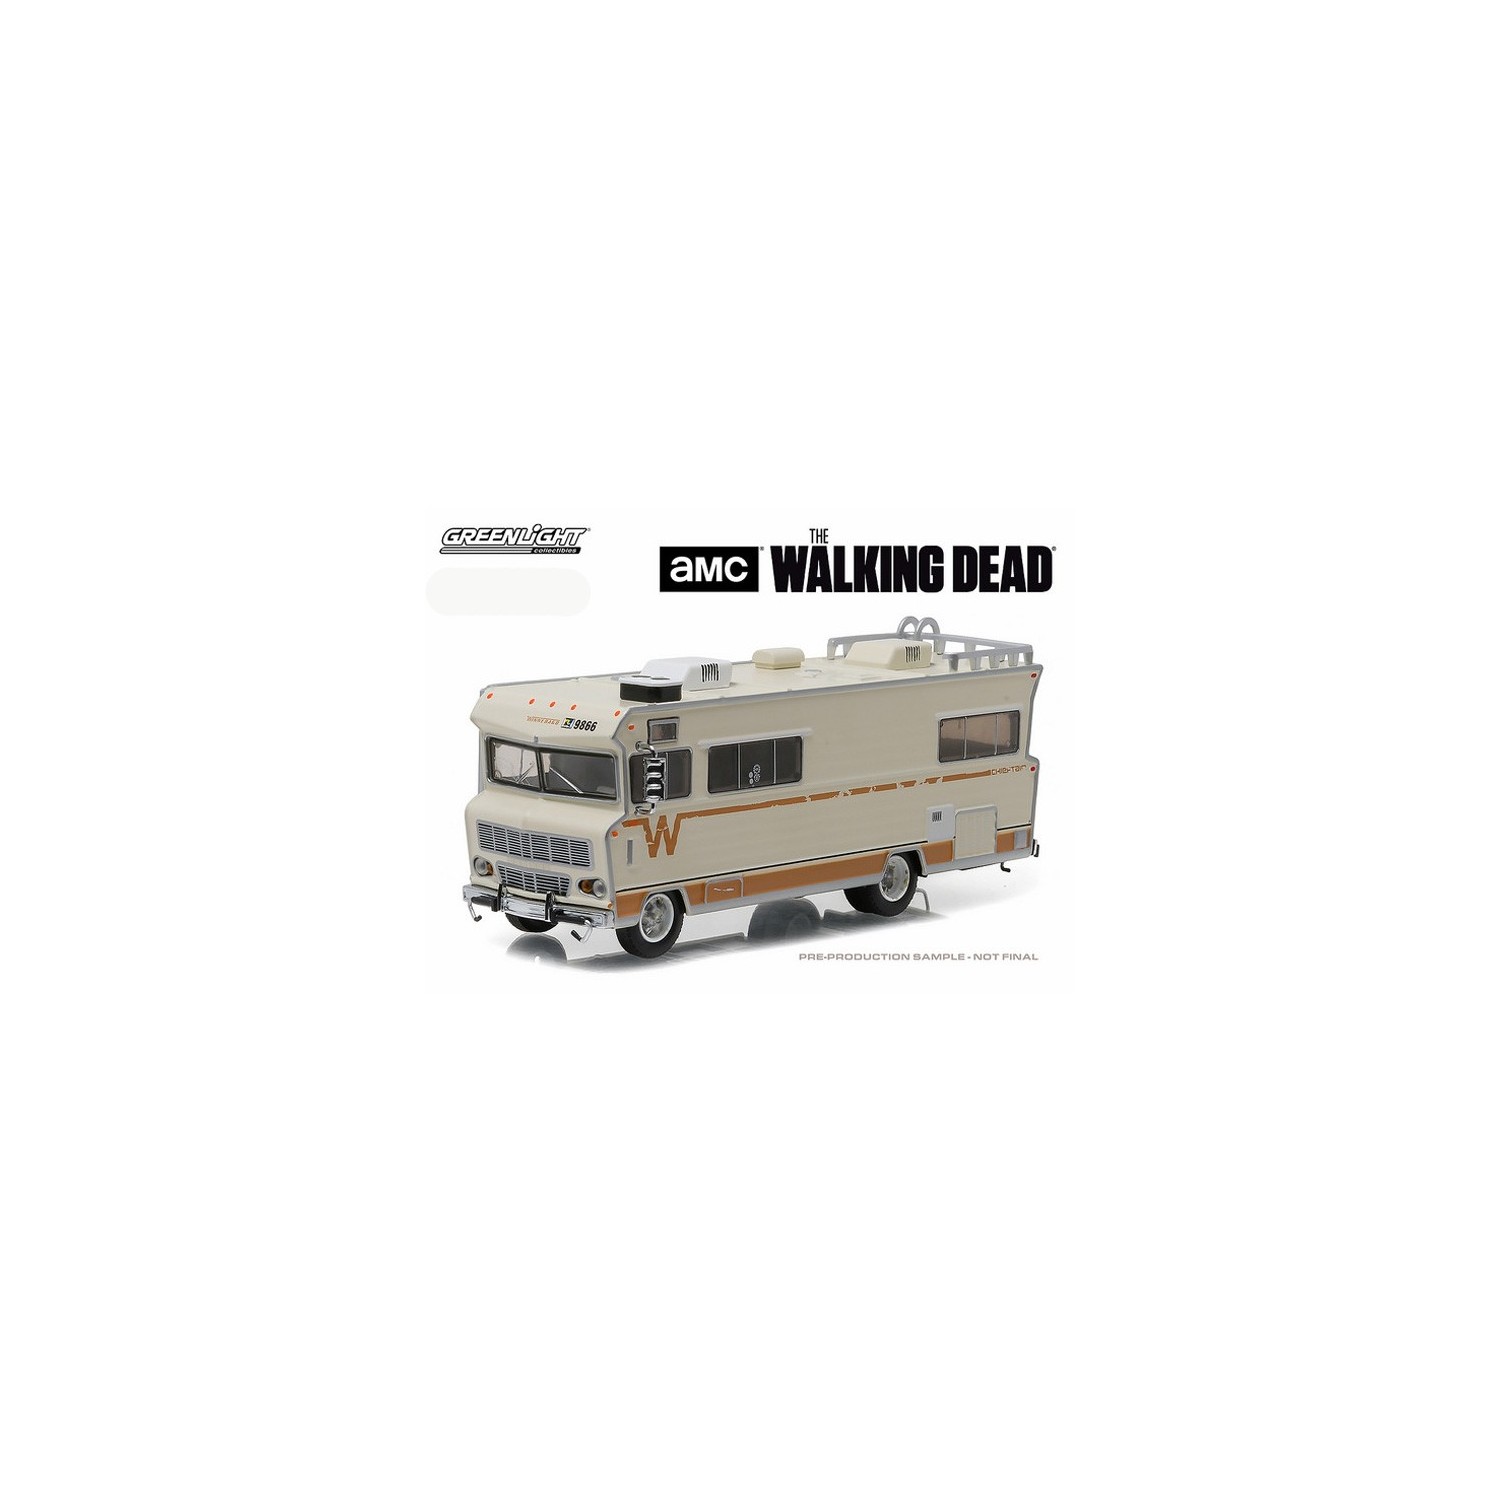 H-D TRUCKS SERIES 10 New 1:64 GREENLIGHT COLLECTION Beige 1973 Winnebago Chieftain with Accessories Diecast Model Car By Greenlight The Walking Dead